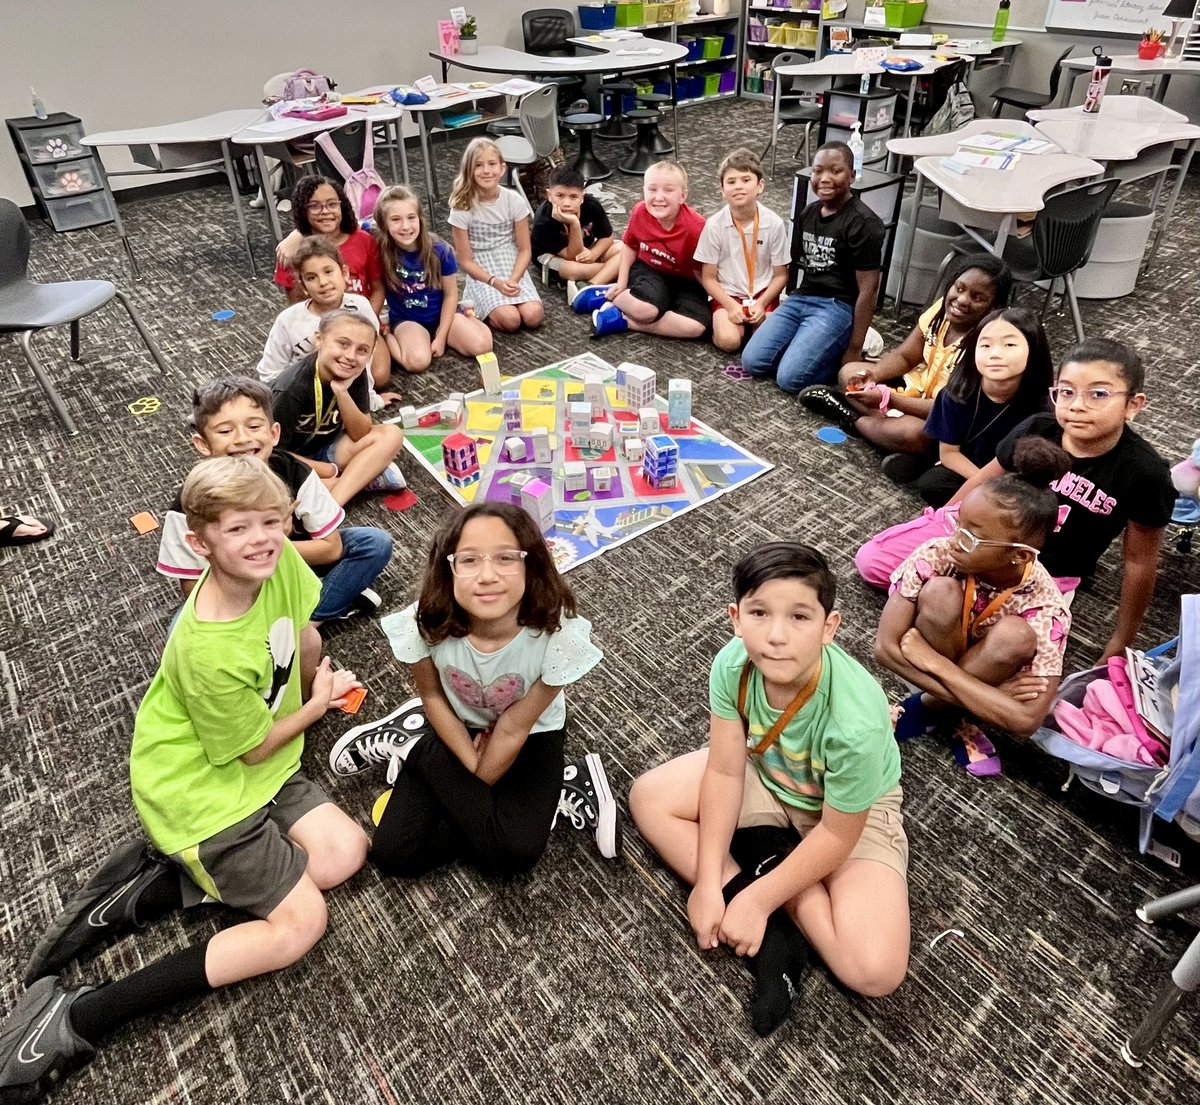 Today we celebrated our last Junior Achievement lesson! Students learned about how money flows through a community. They also worked together to construct a city! @BlackBearkats #bearkatbest